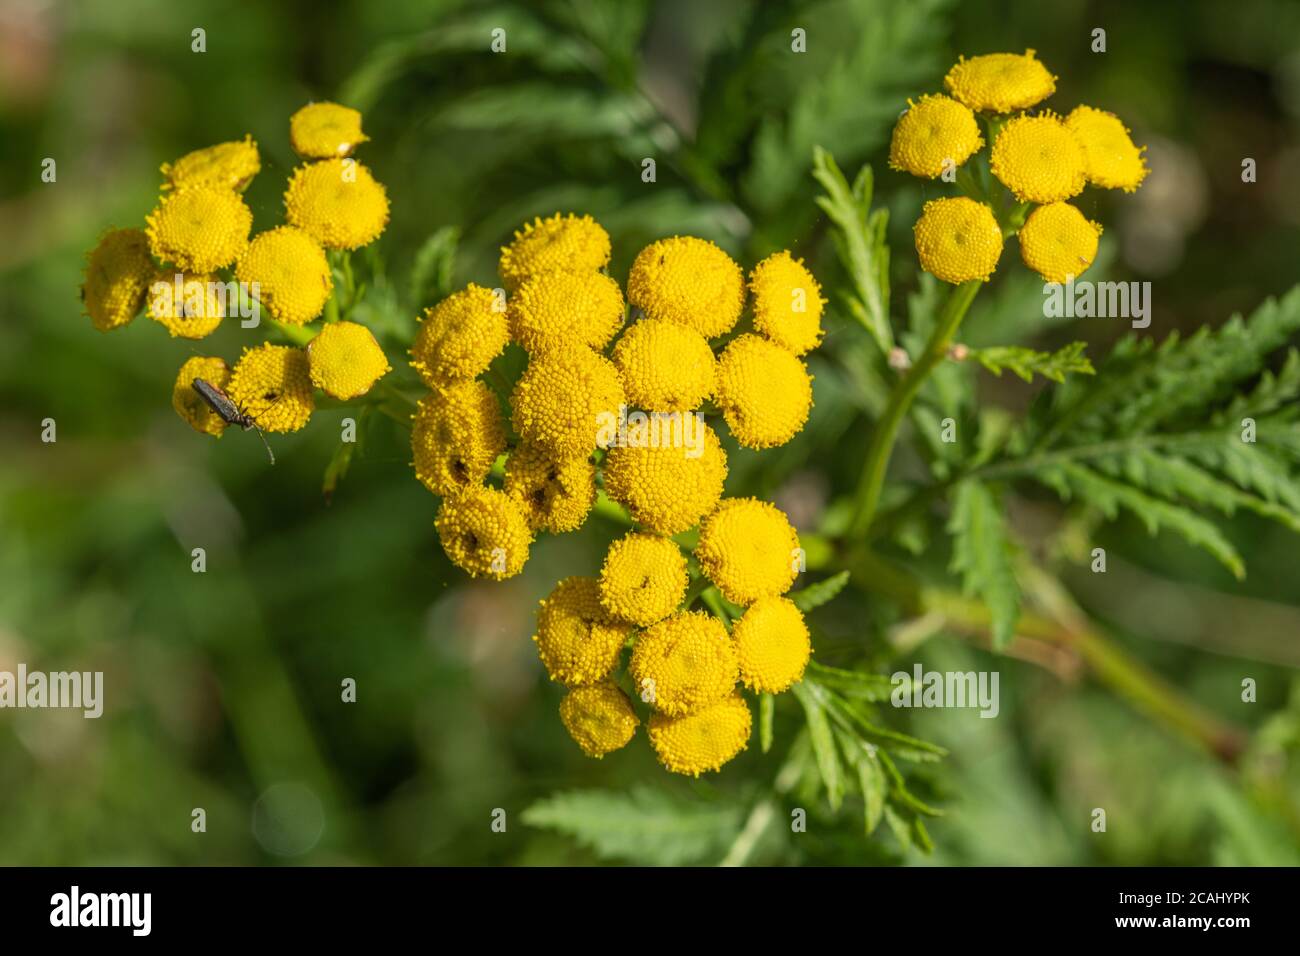 Tansy plant (Tanacetum vulgare) with yellow flowers, a perennial, herbaceous flowering plant of the aster family Stock Photo